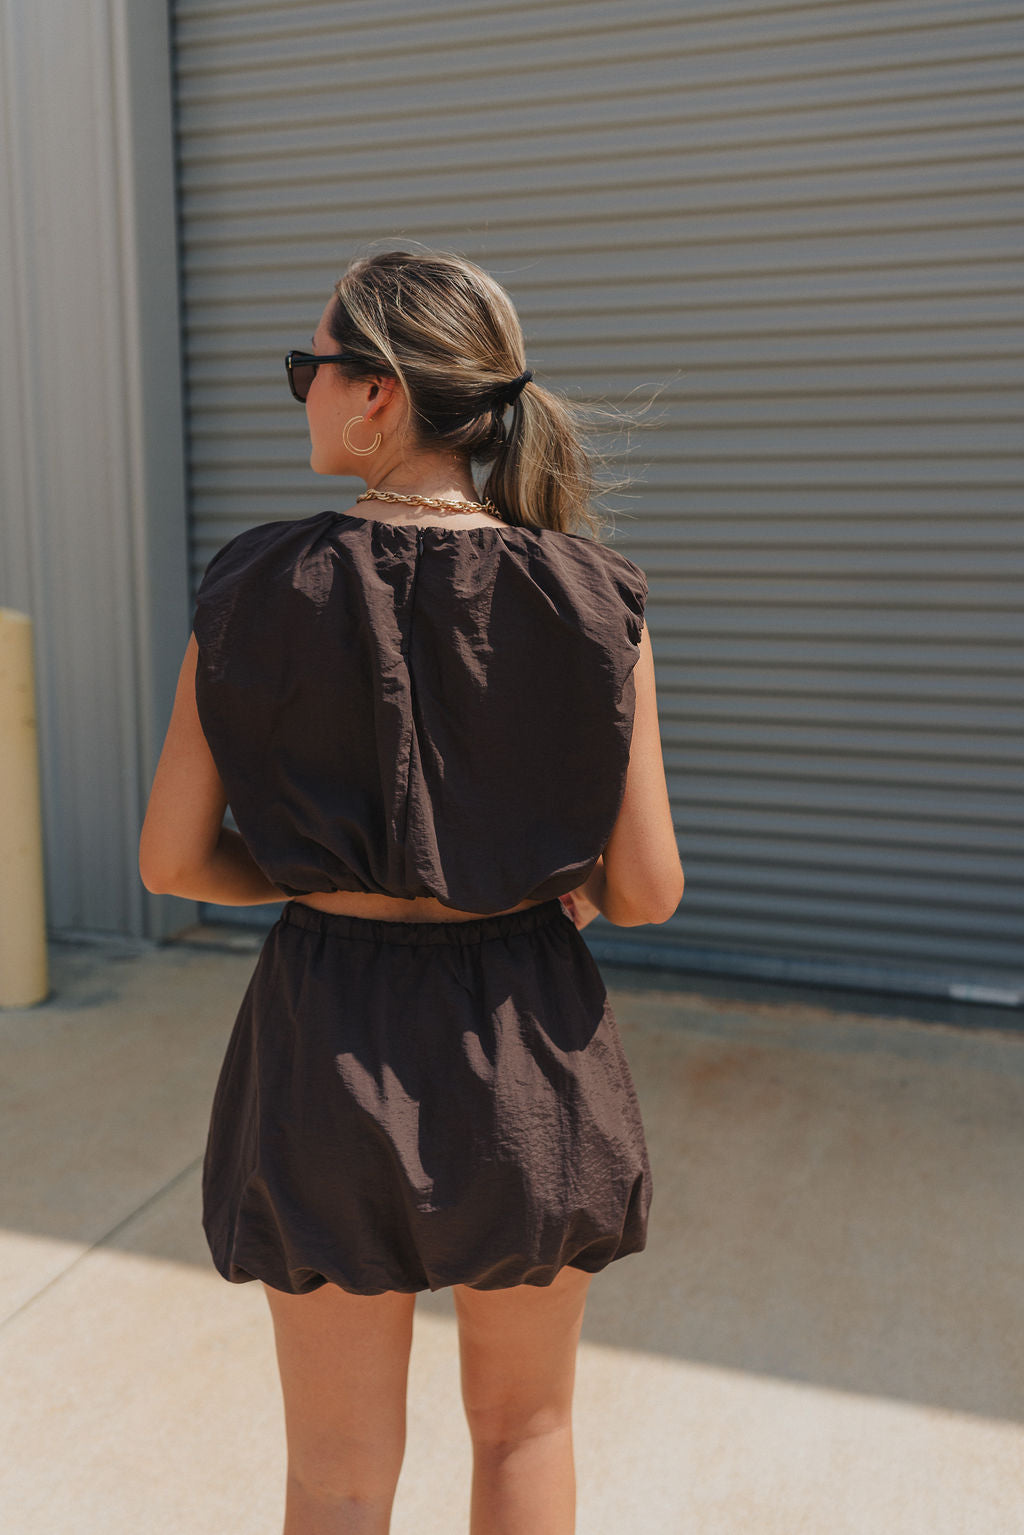 Back view of model wearing Tatum Mini Skirt in espresso. This is a mini skirt with a drawstring waistband, bubble hem, and mini length.